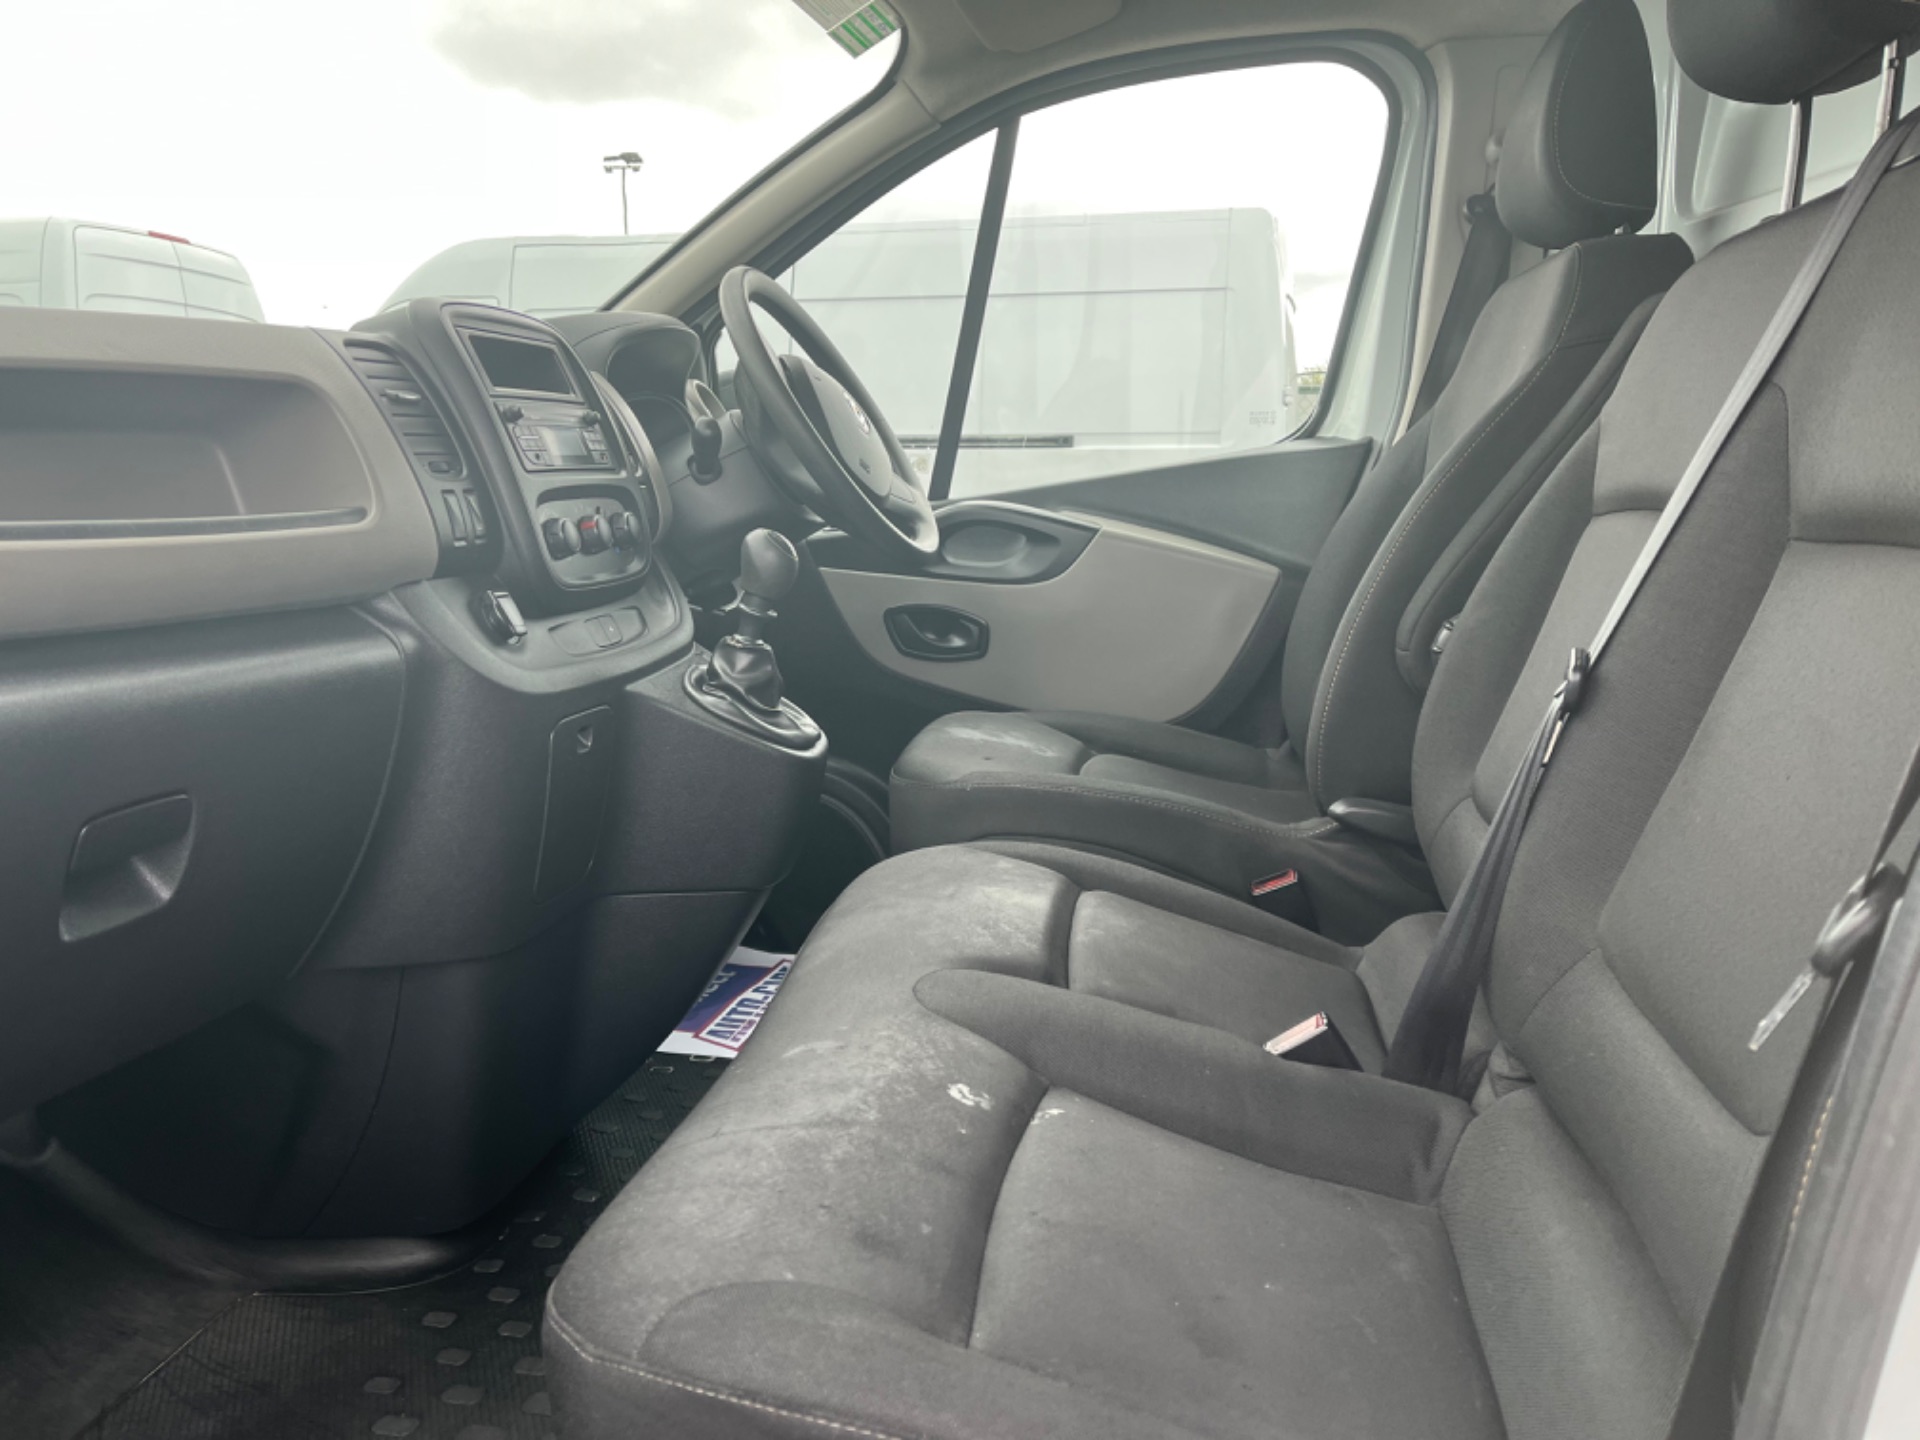 2019 Renault Trafic LL29 DCI 120 Business (191D16435) Image 6